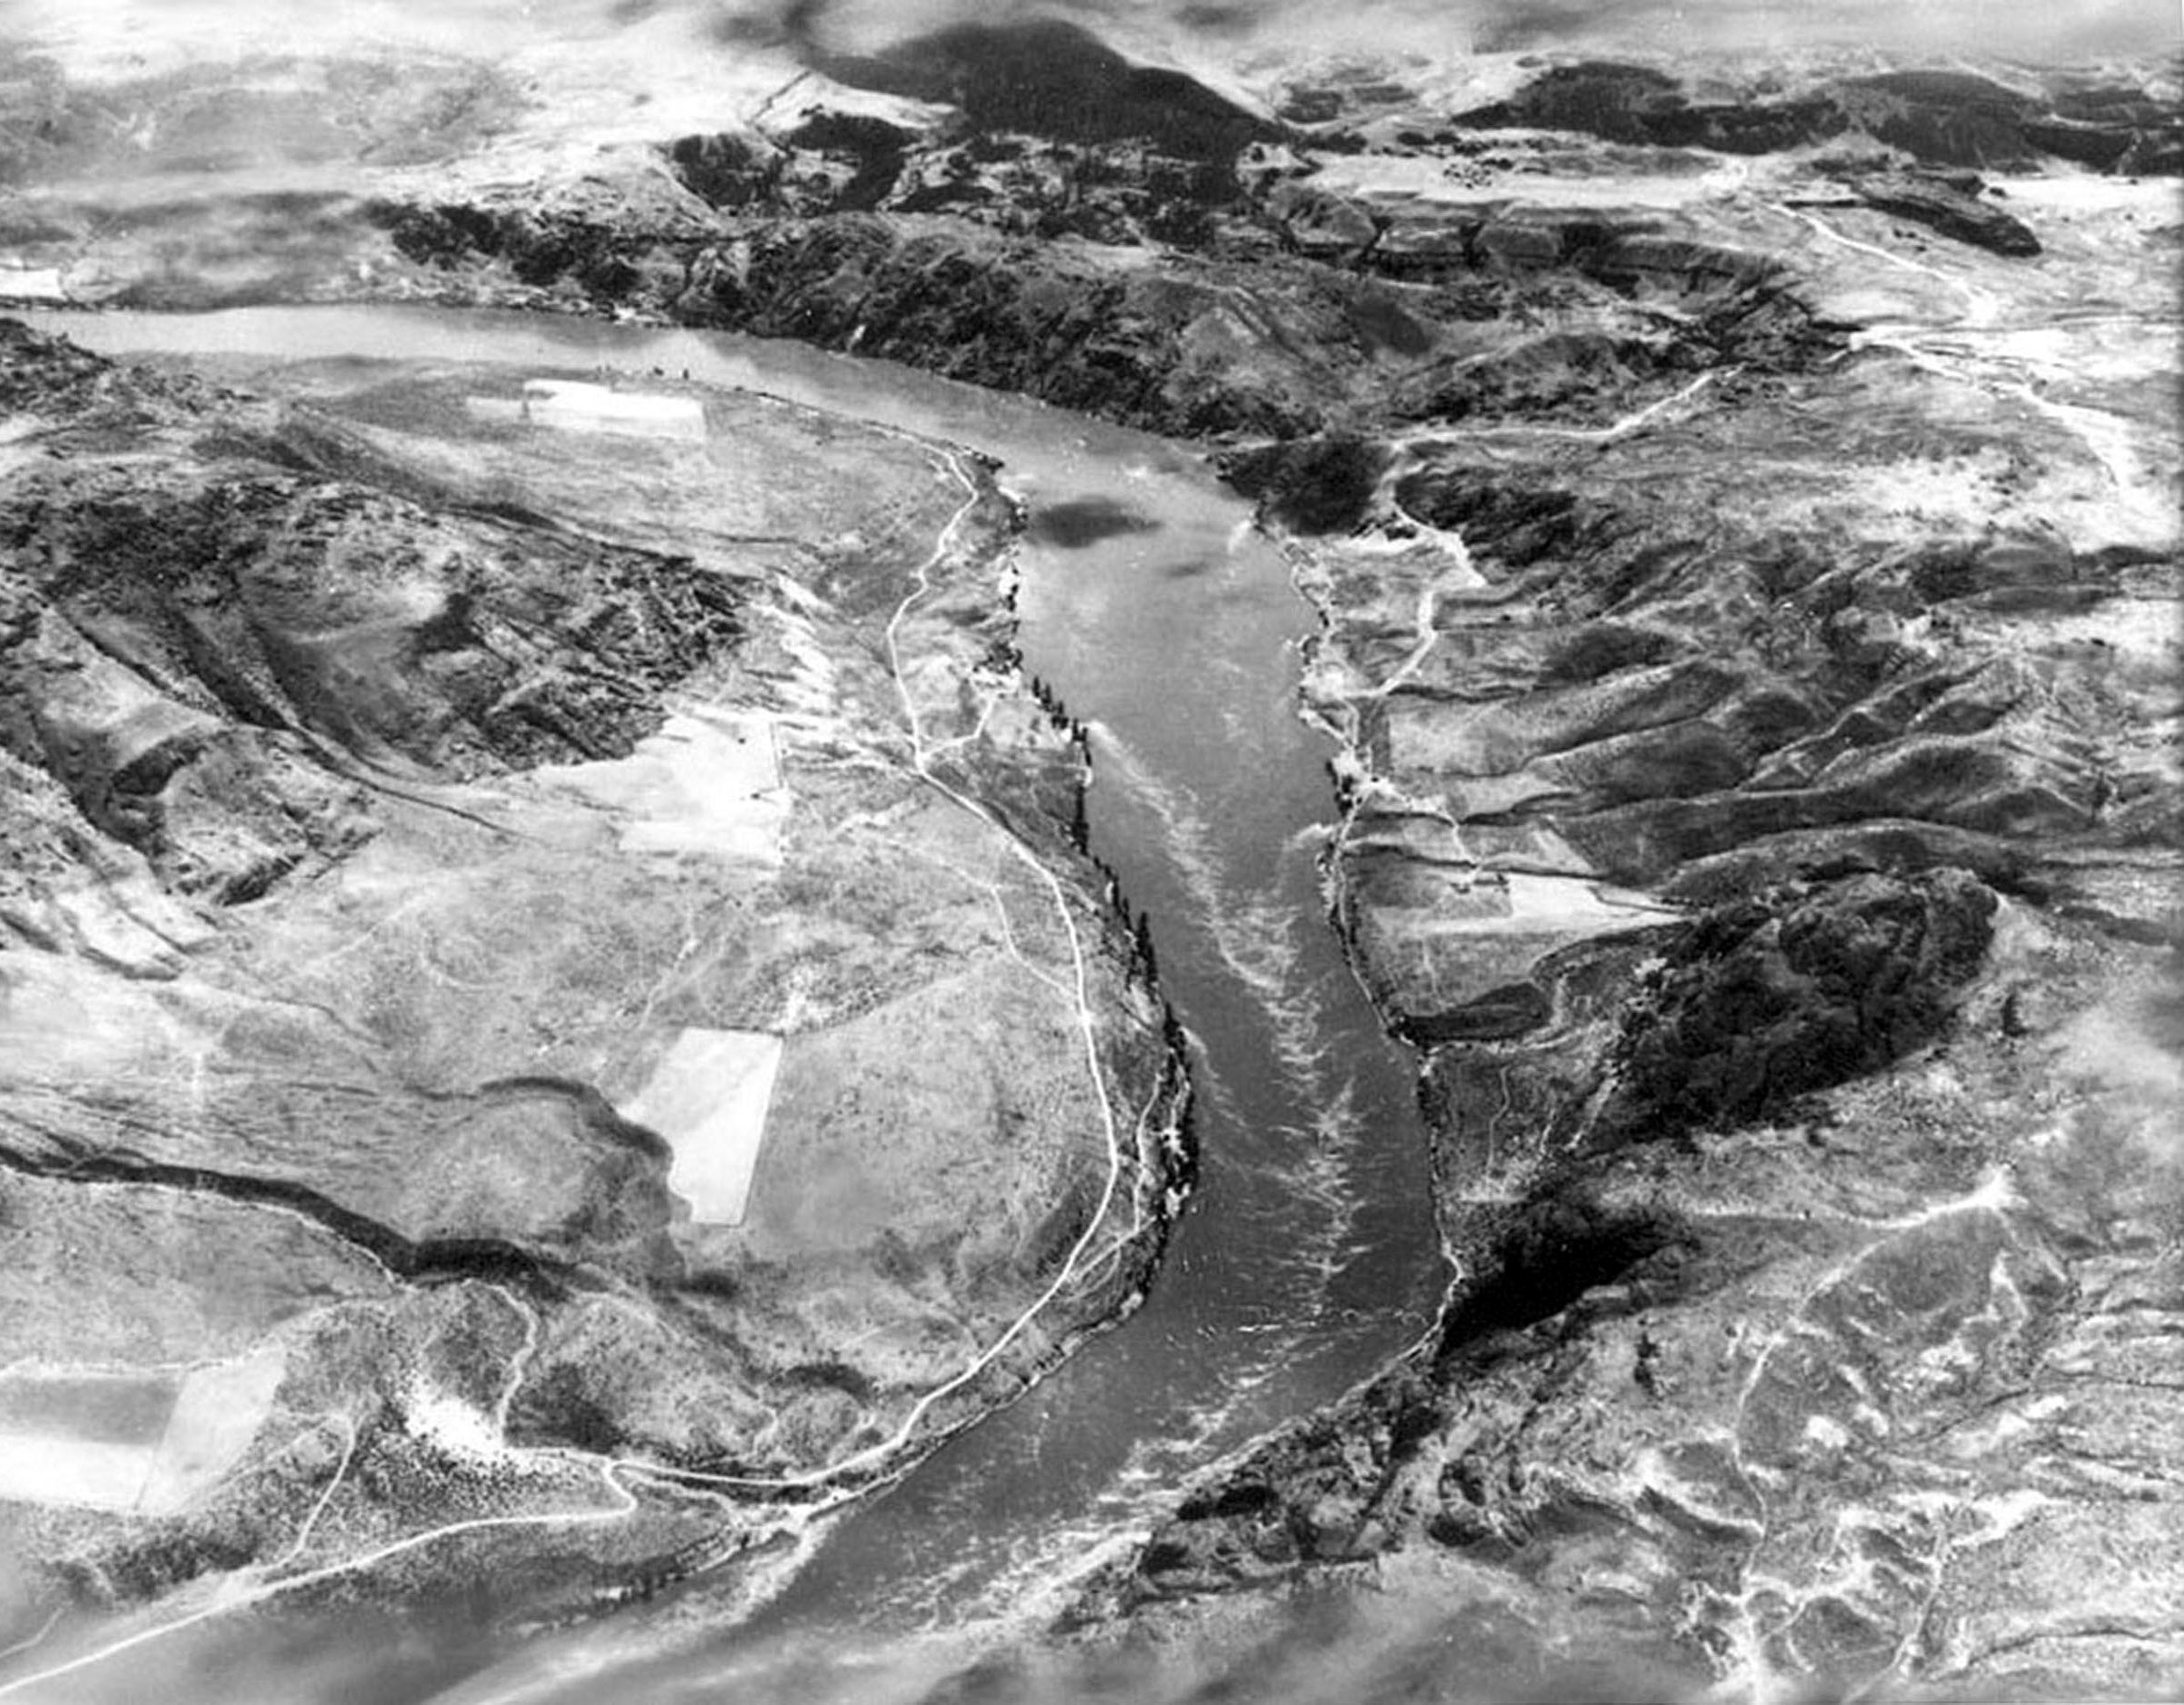 Photo taken Circa 1933. The Columbia River, showing the site for the Grand Coulee Dam.